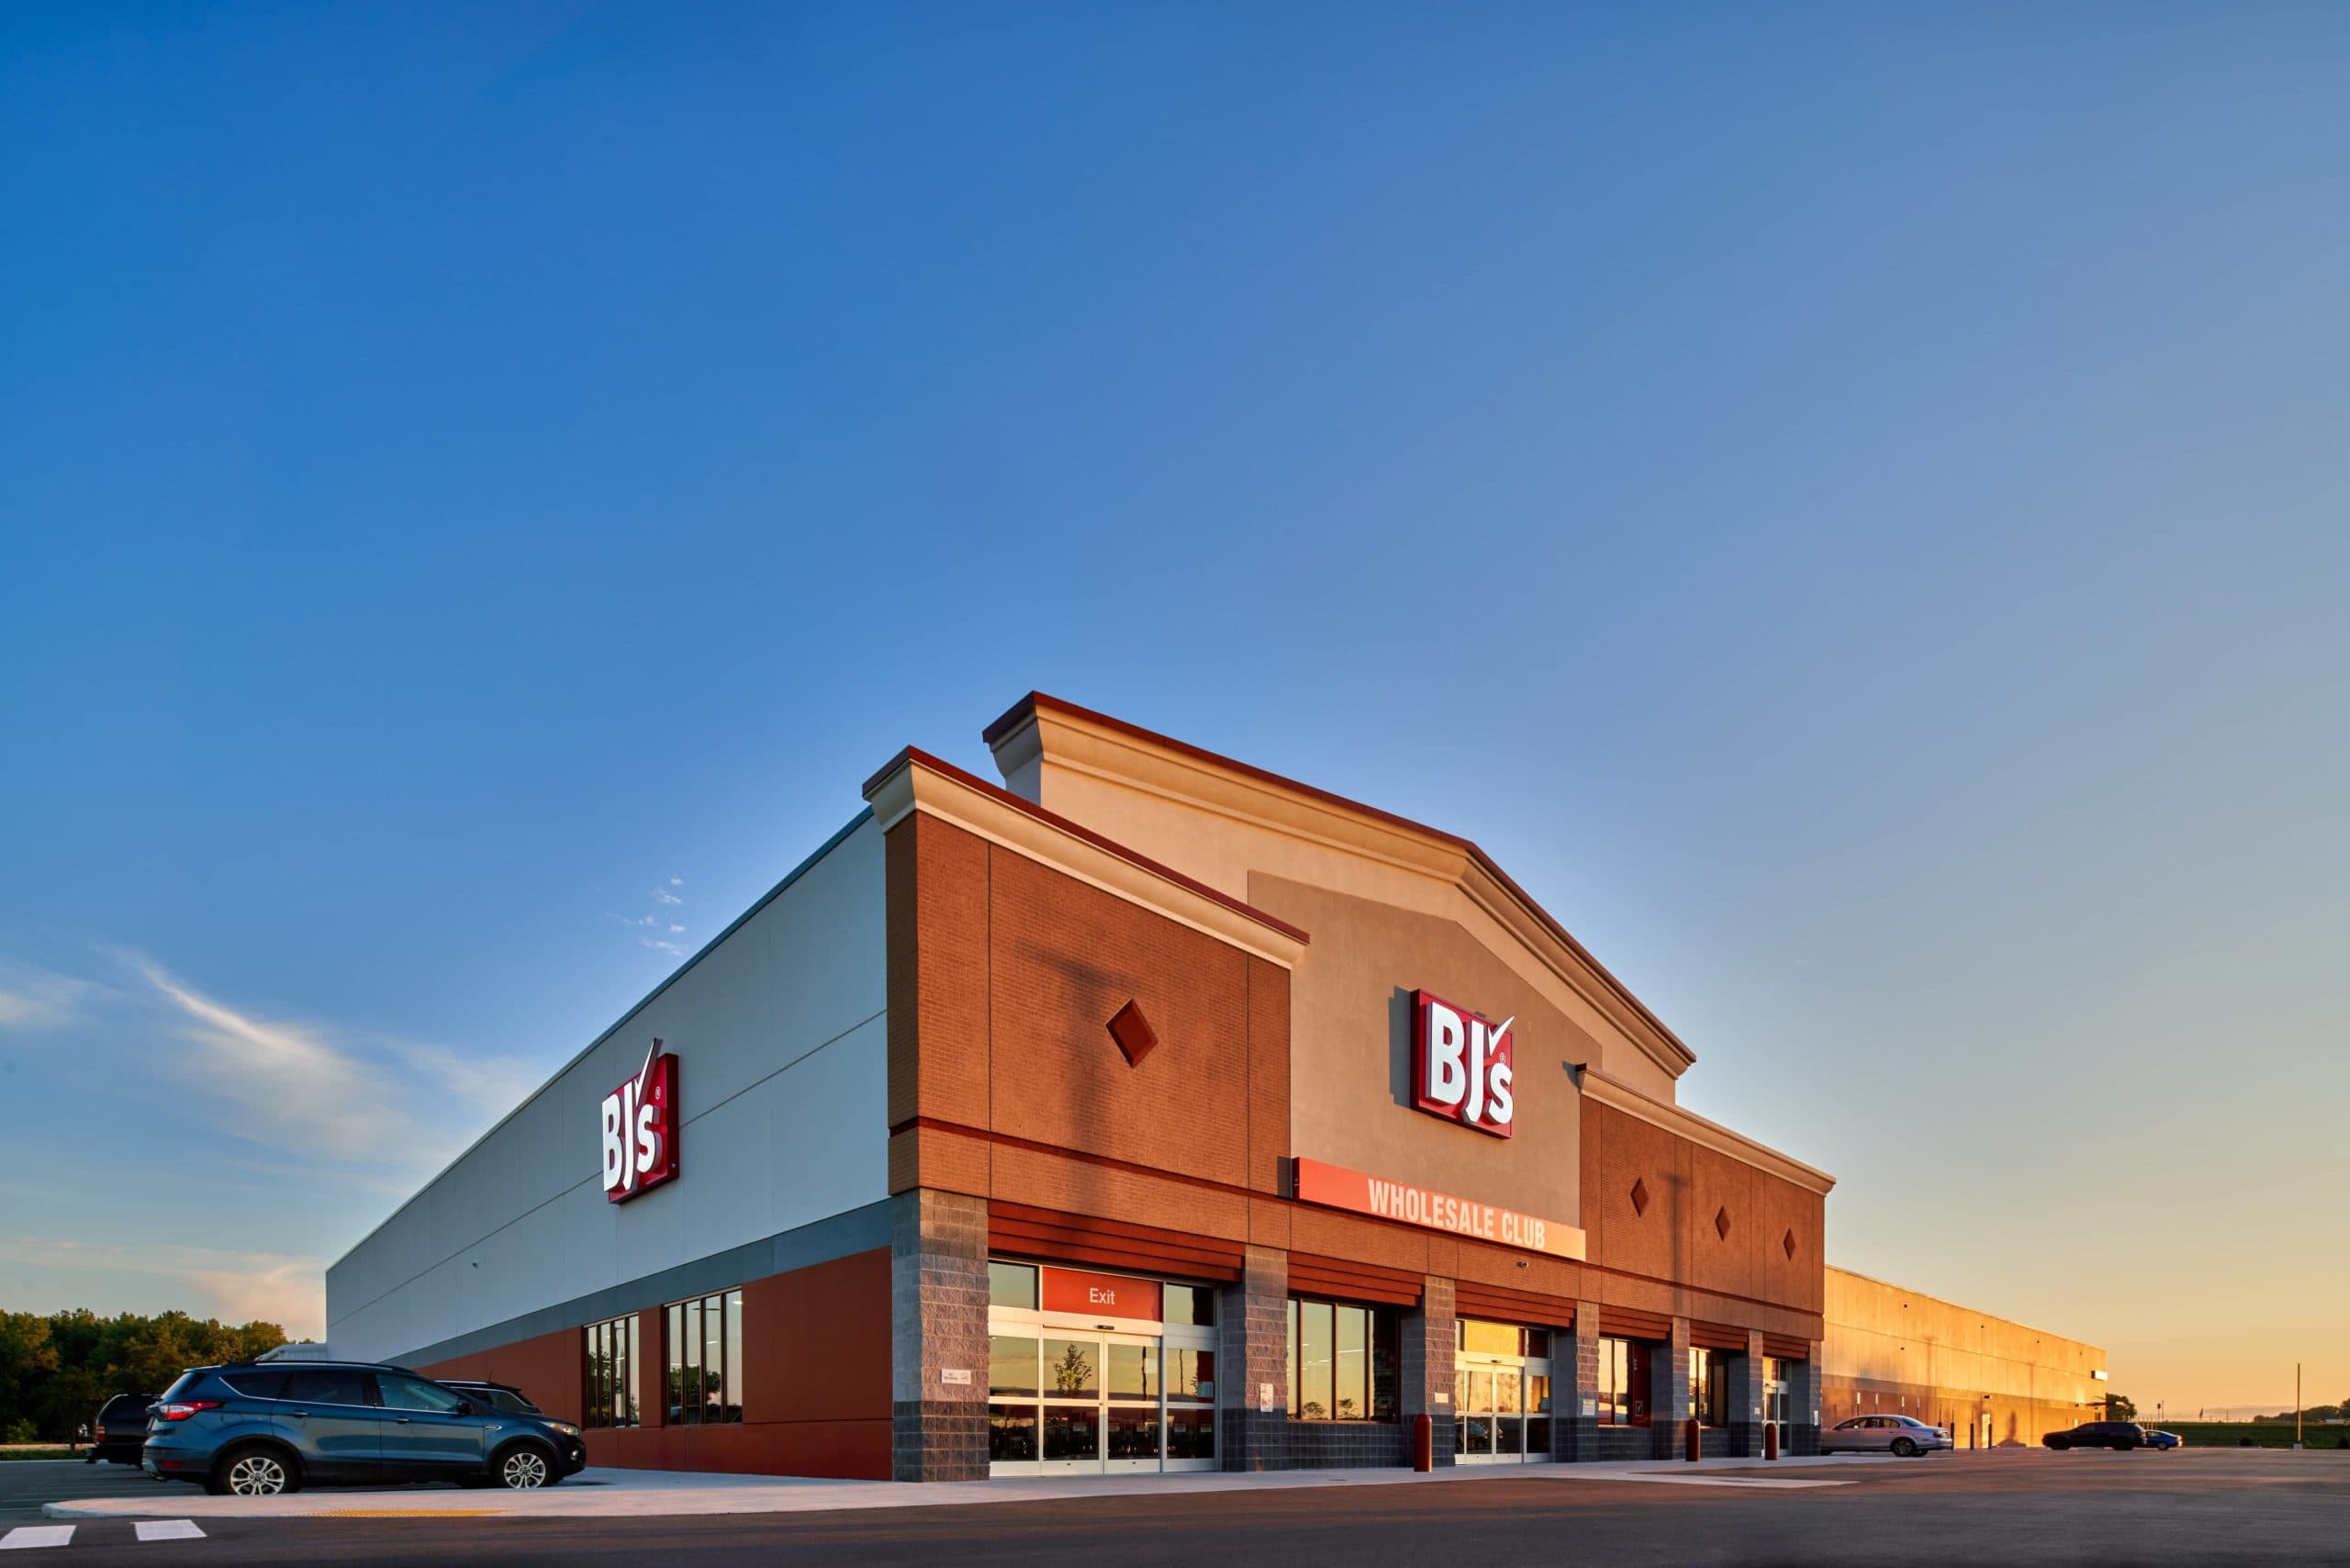 KIRCO MANIX Completes Third BJ’s Wholesale Location in Chesterfield, Michigan